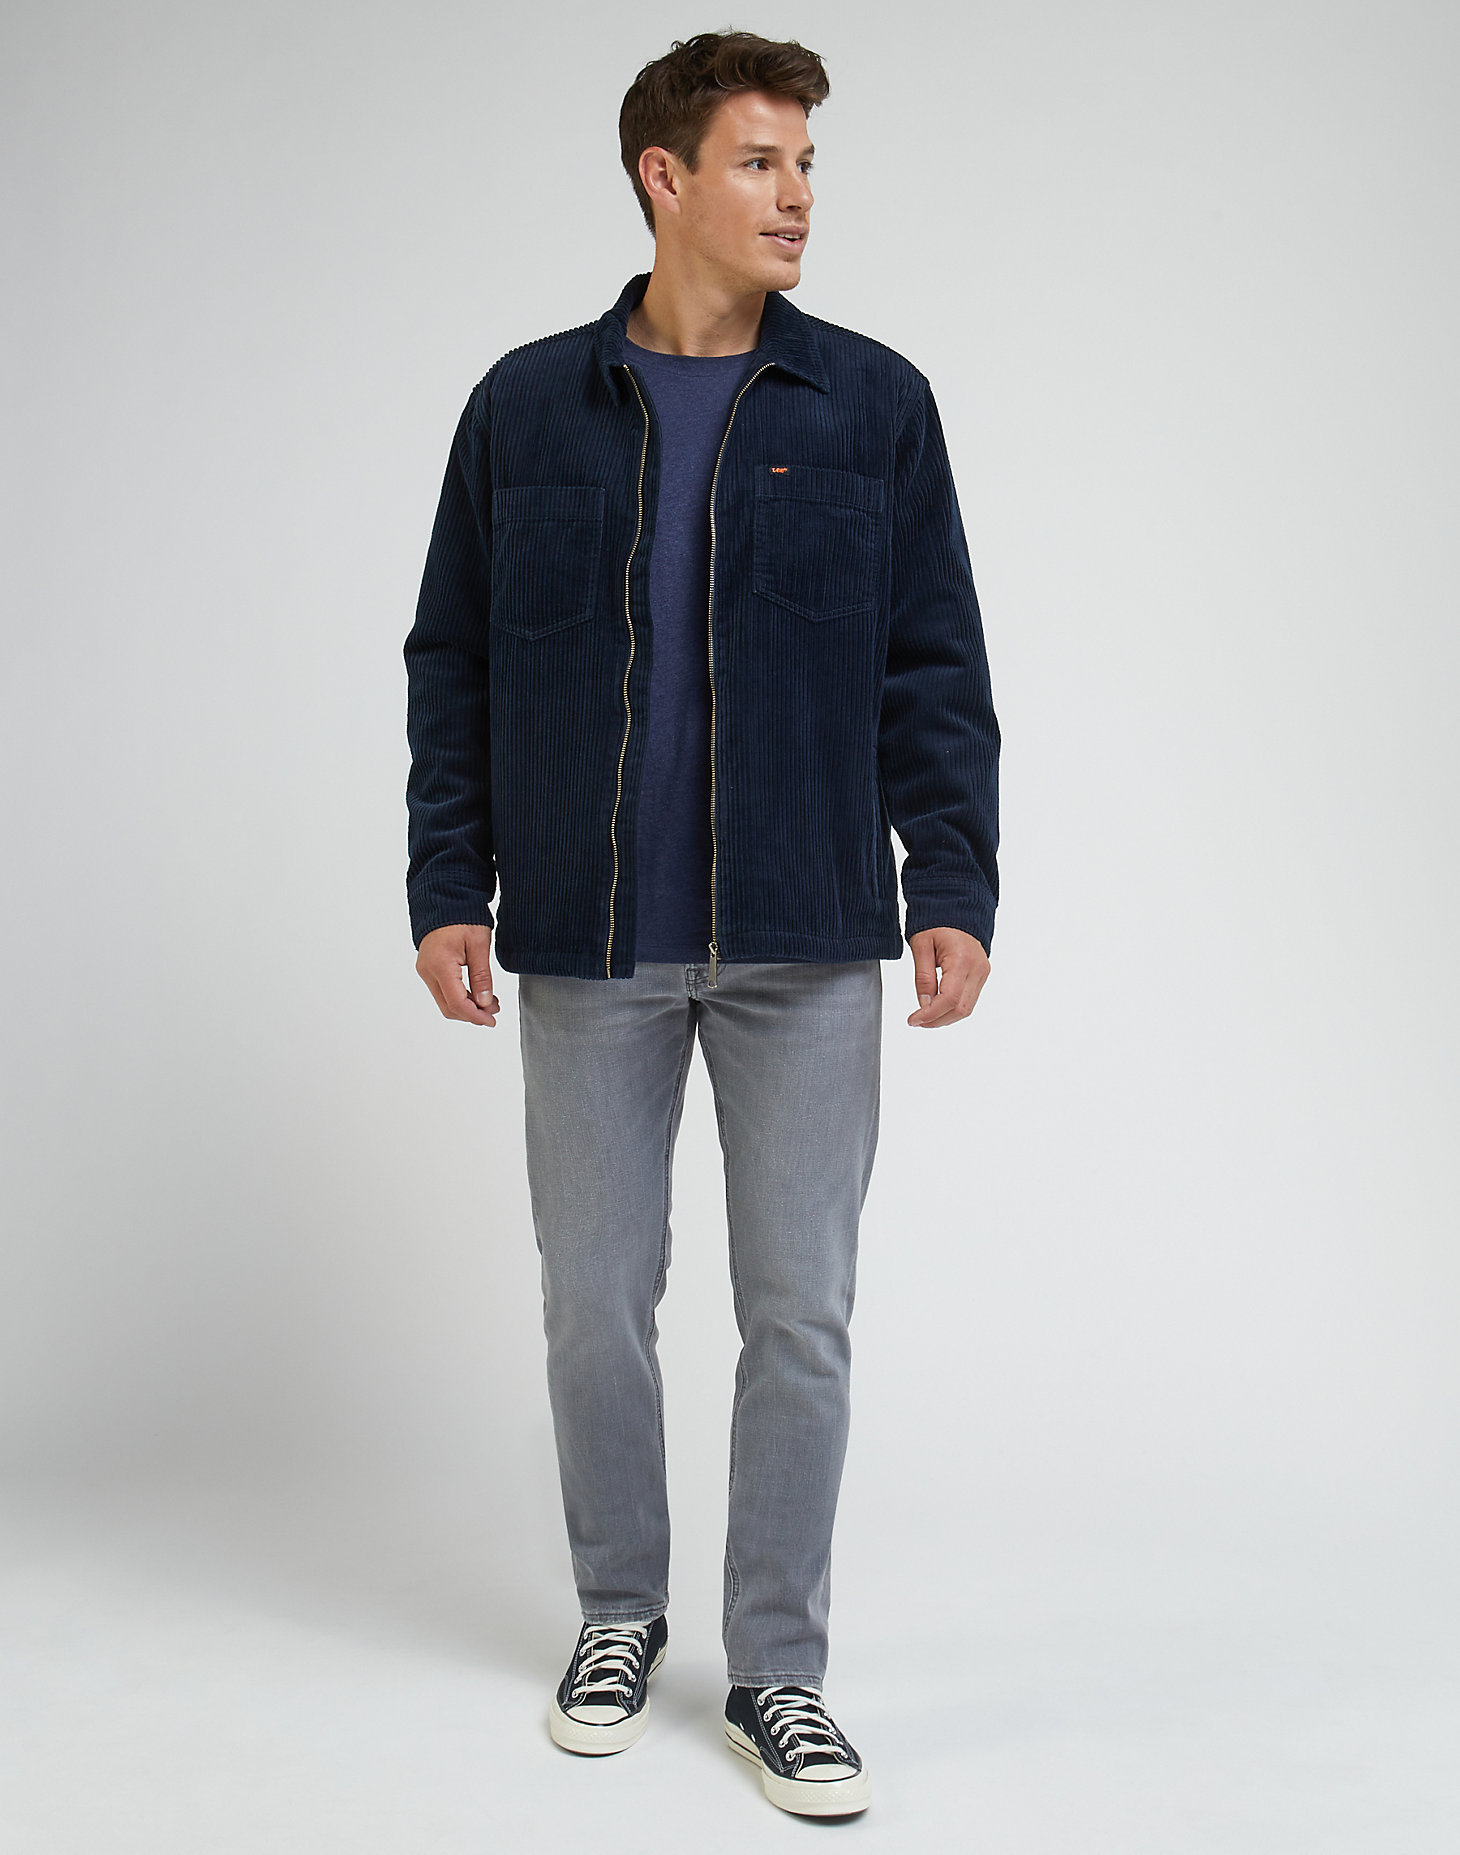 Relaxed Chetopa Overshirt in Sky Captain alternative view 2